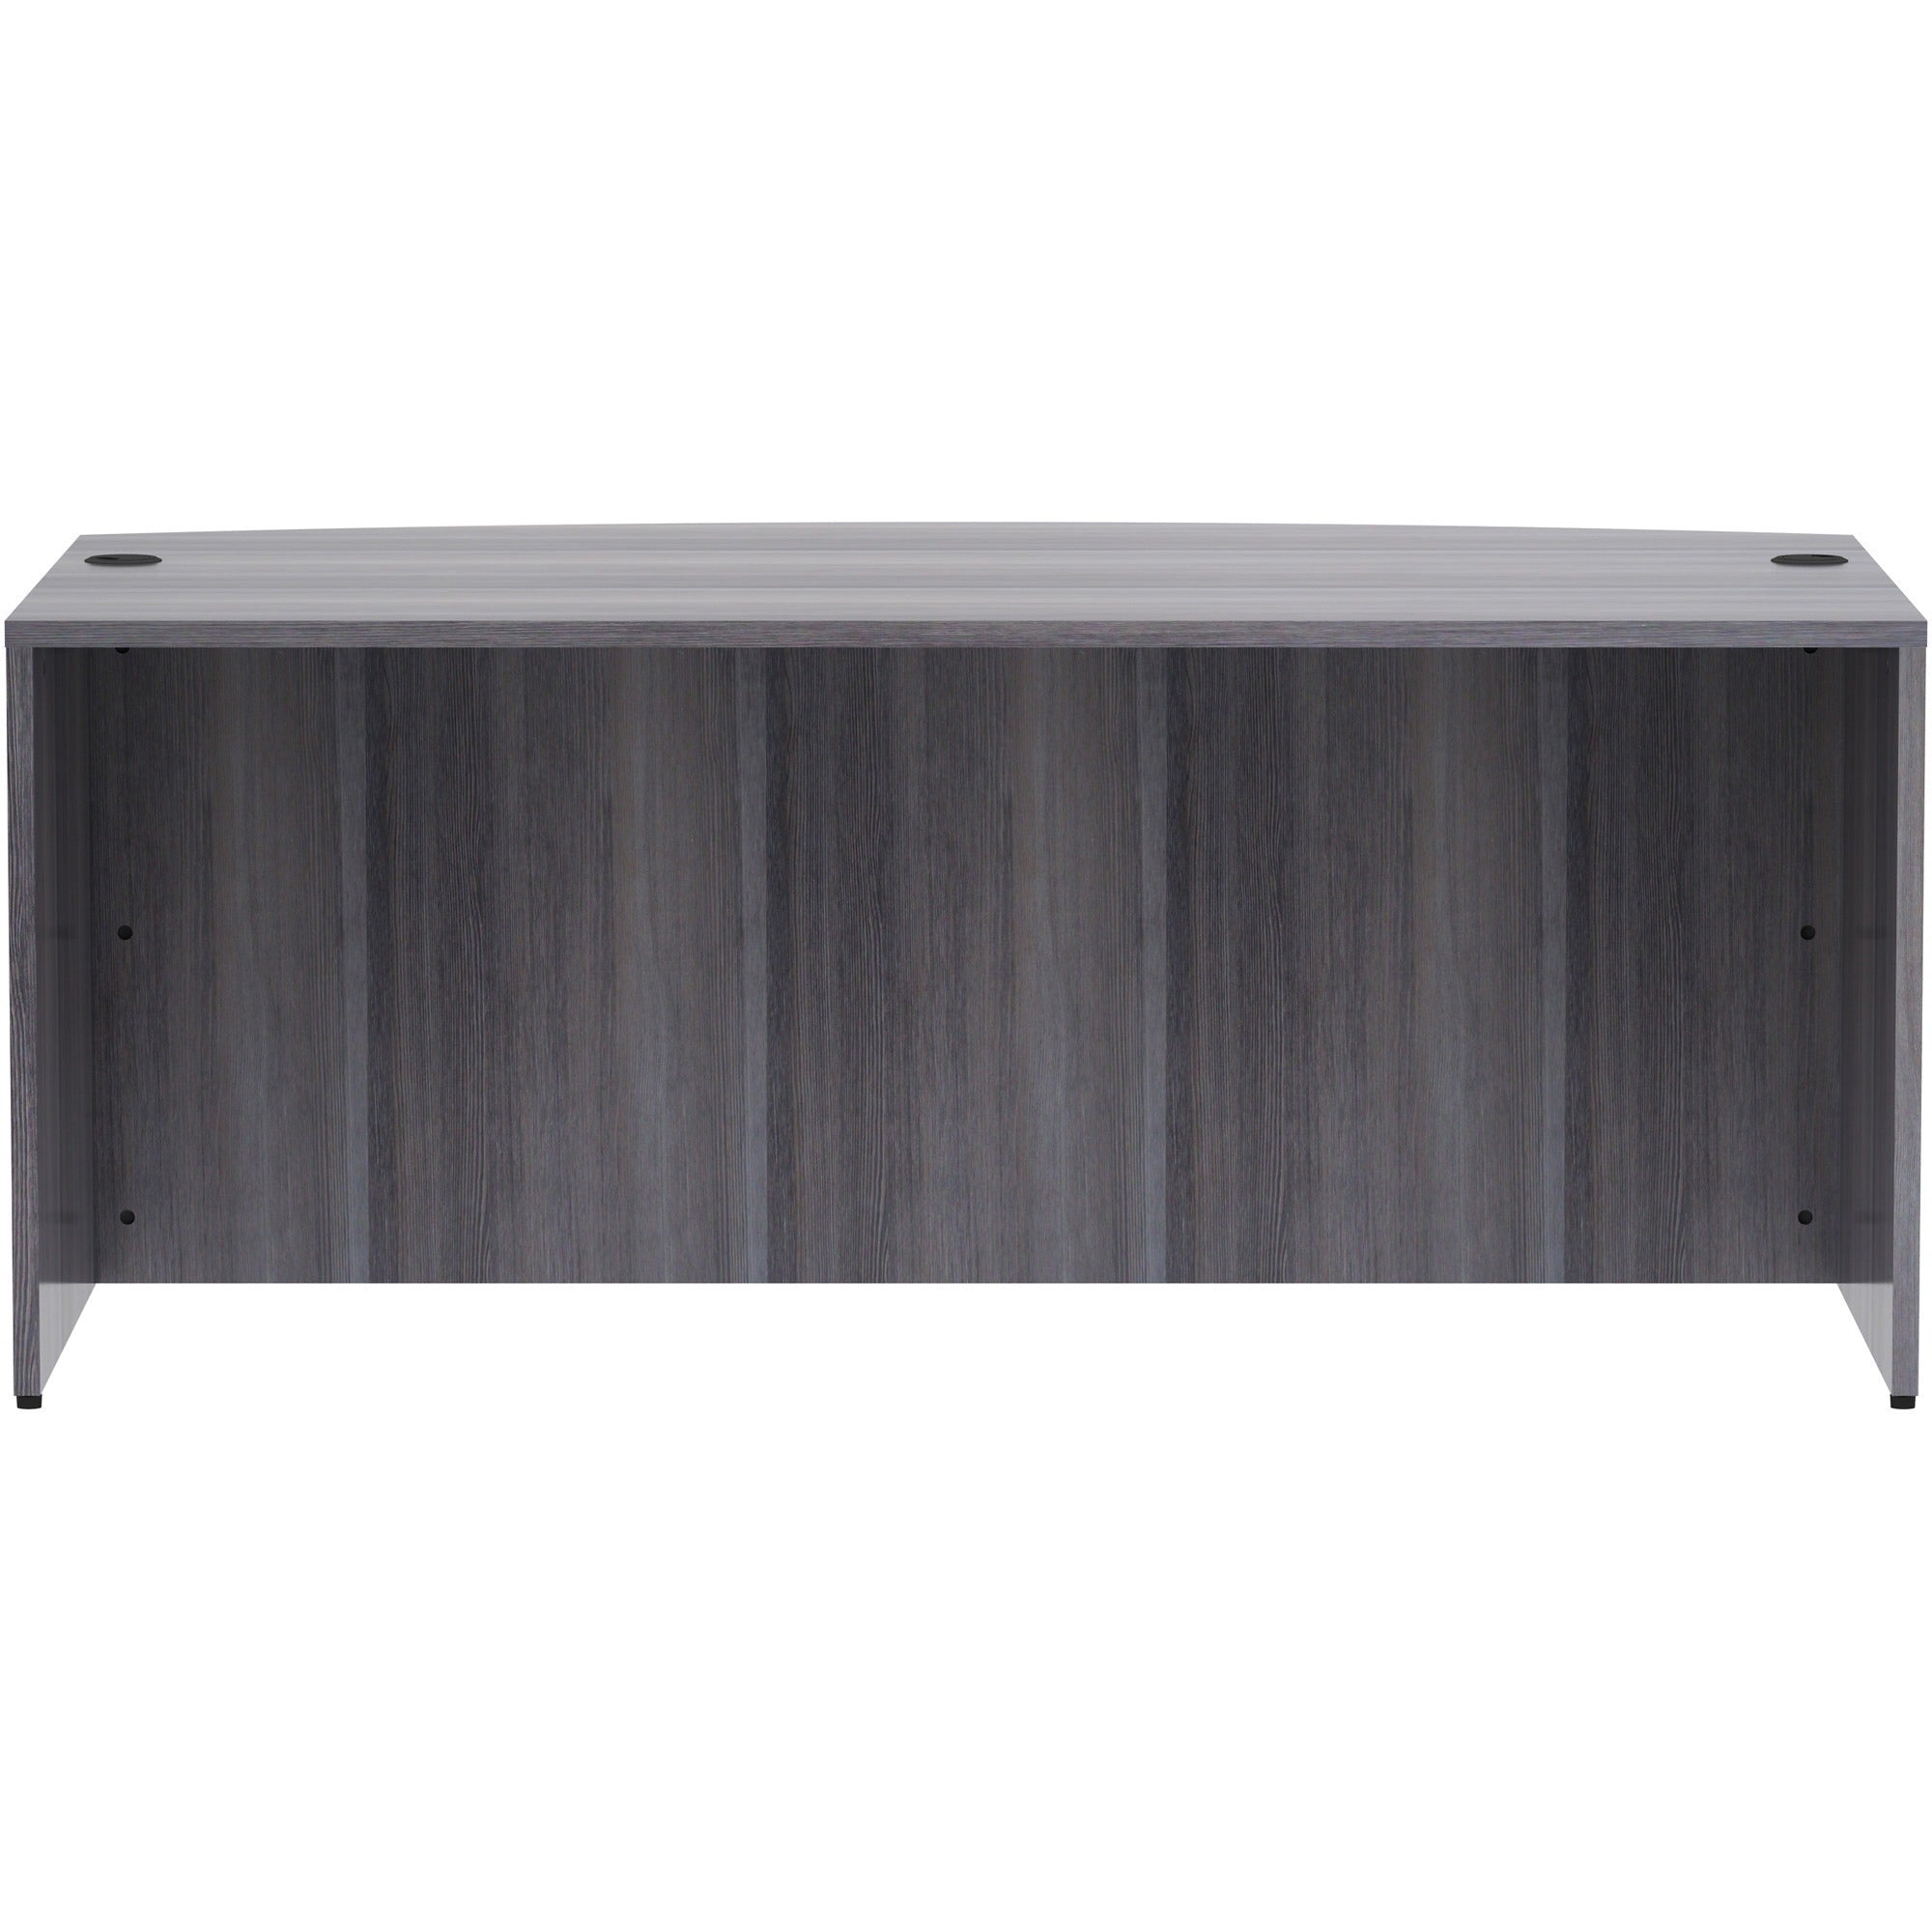 lorell-essentials-series-bowfront-desk-shell-72-x-414295-desk-shell-1-top-bow-front-edge-finish-weathered-charcoal-laminate_llr69591 - 2